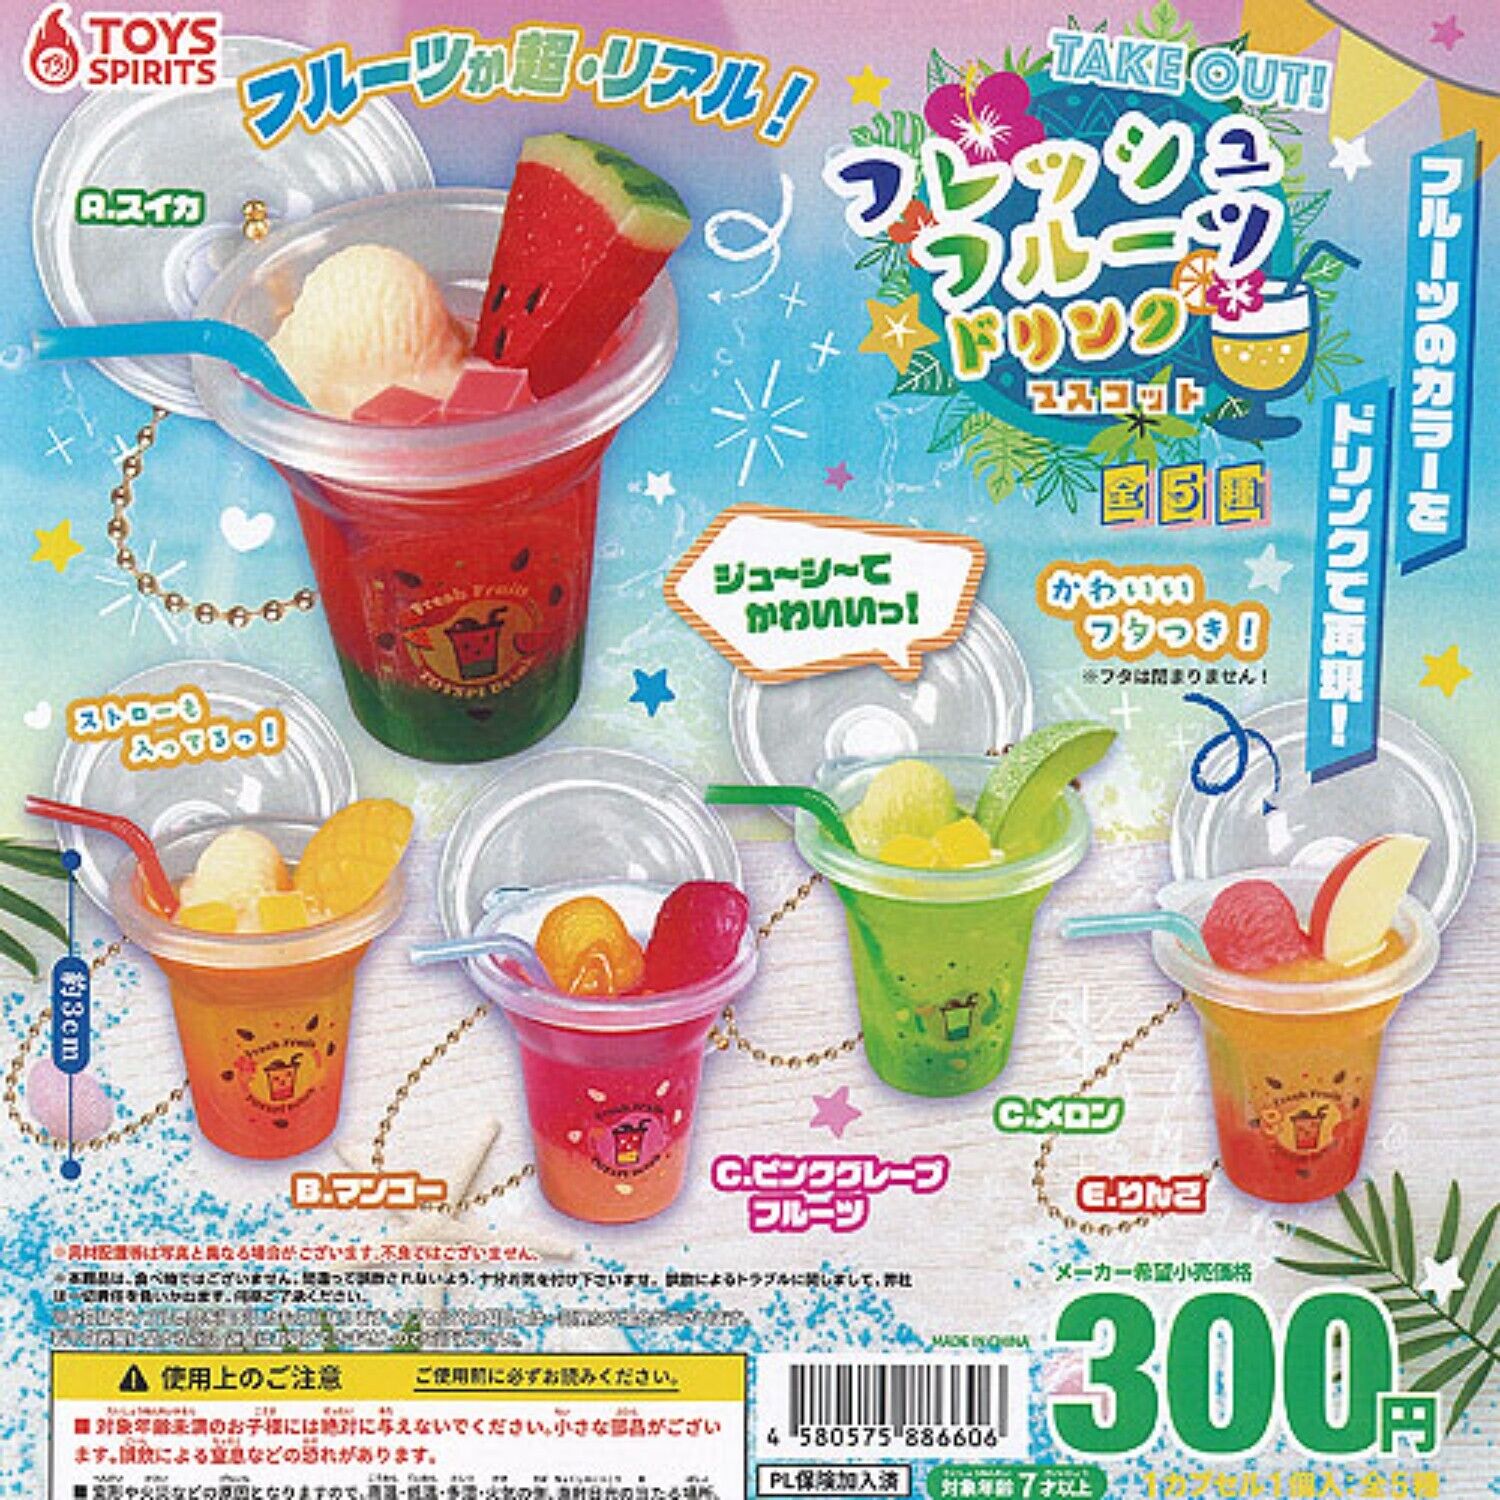 Take out Fresh Fruit Drink Mascot Capsule Toy 5 Types Full Comp Set Gacha New